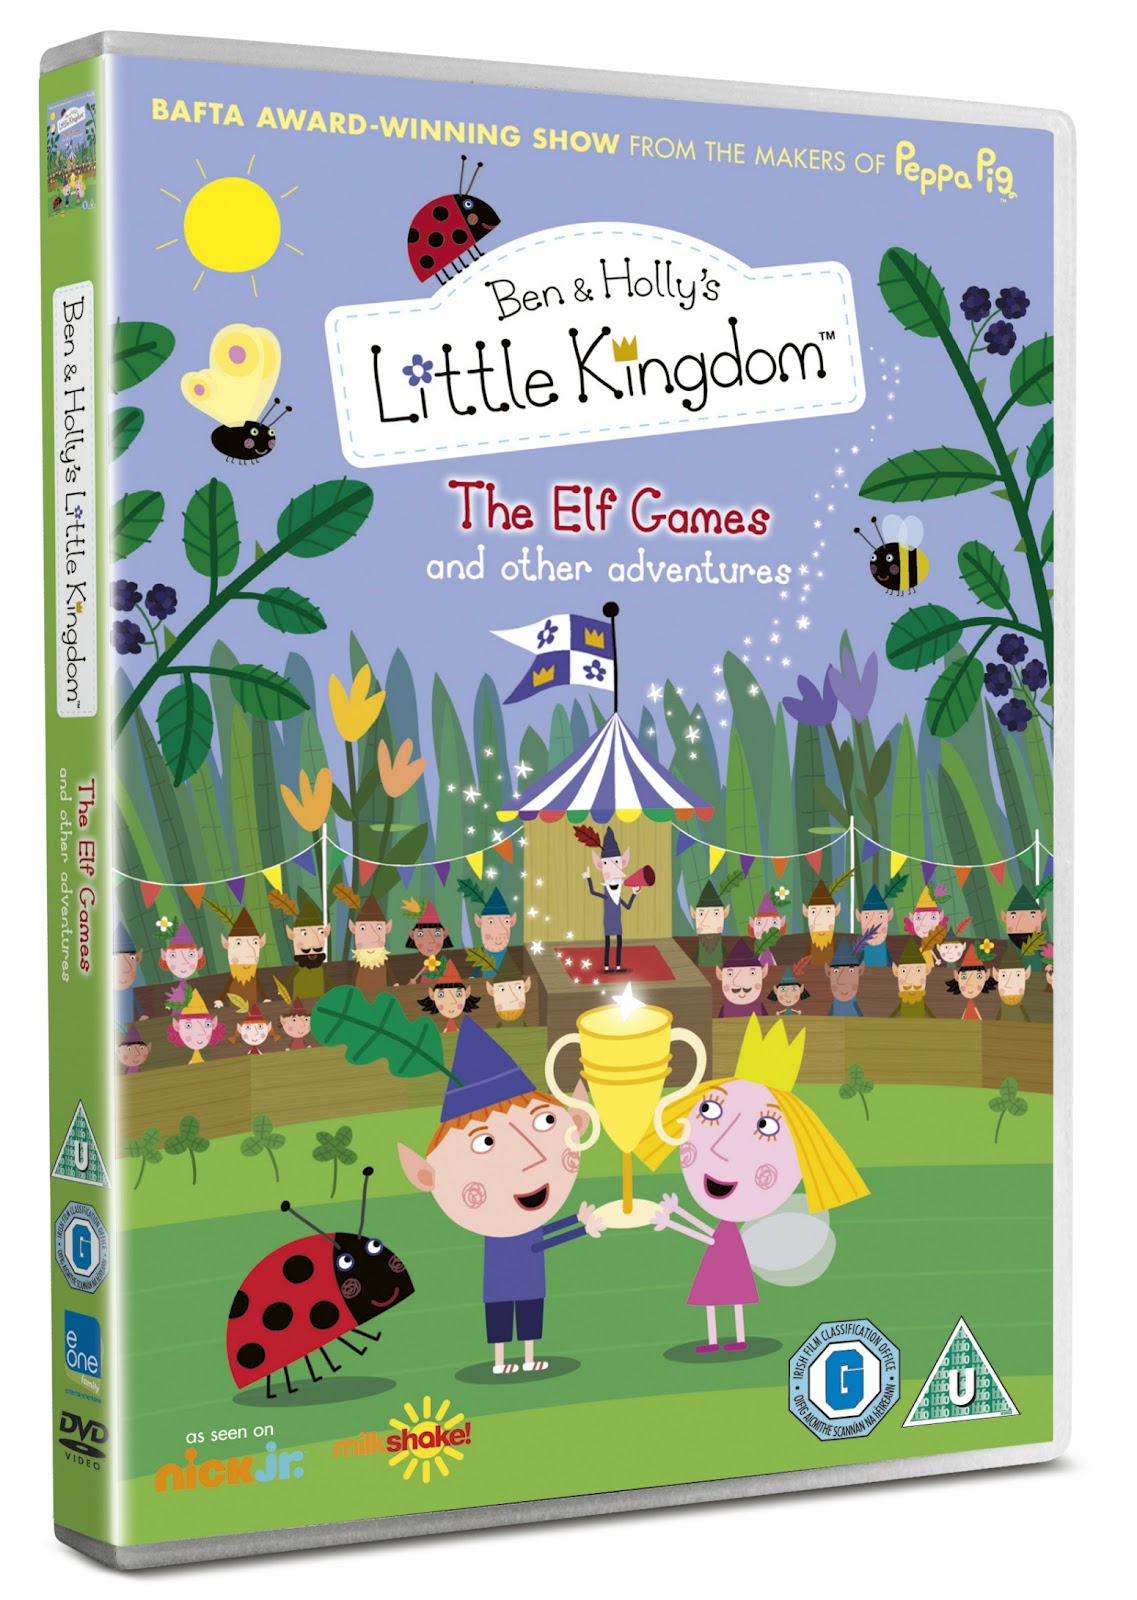 preview ben and holly's little kingdom  the elf games